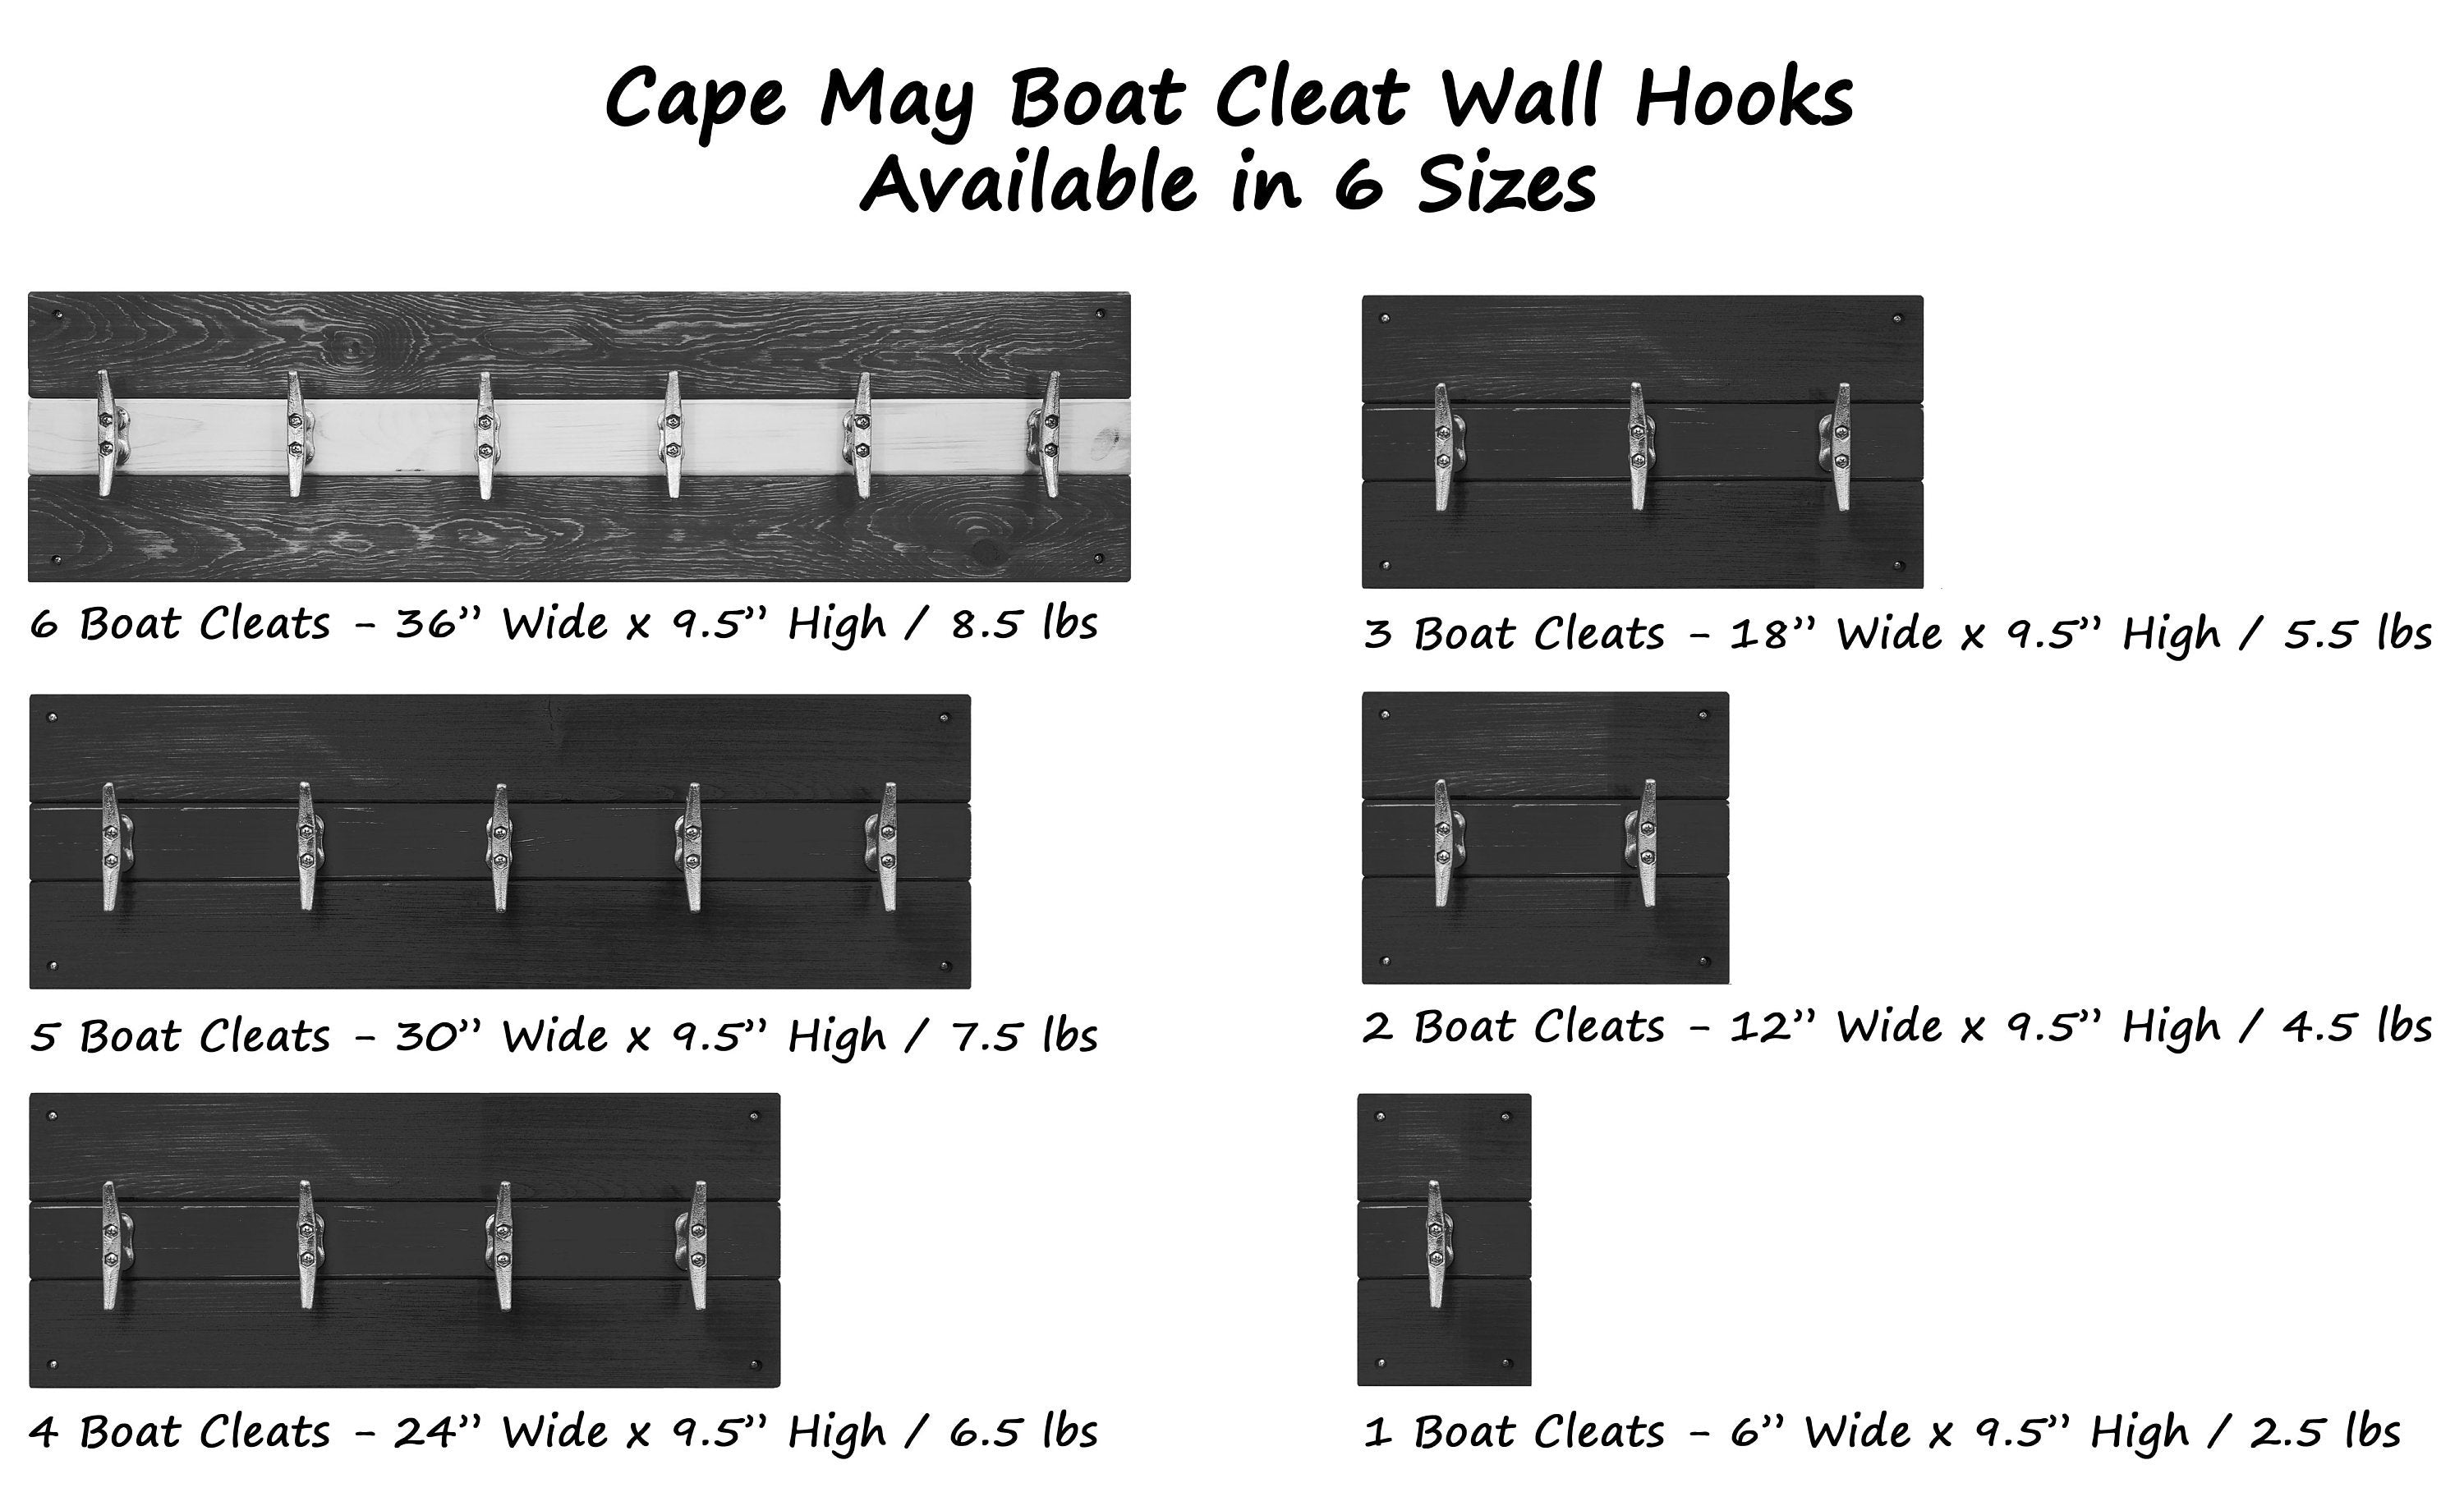 Cape May Boat Cleat Wall Hooks Sizes